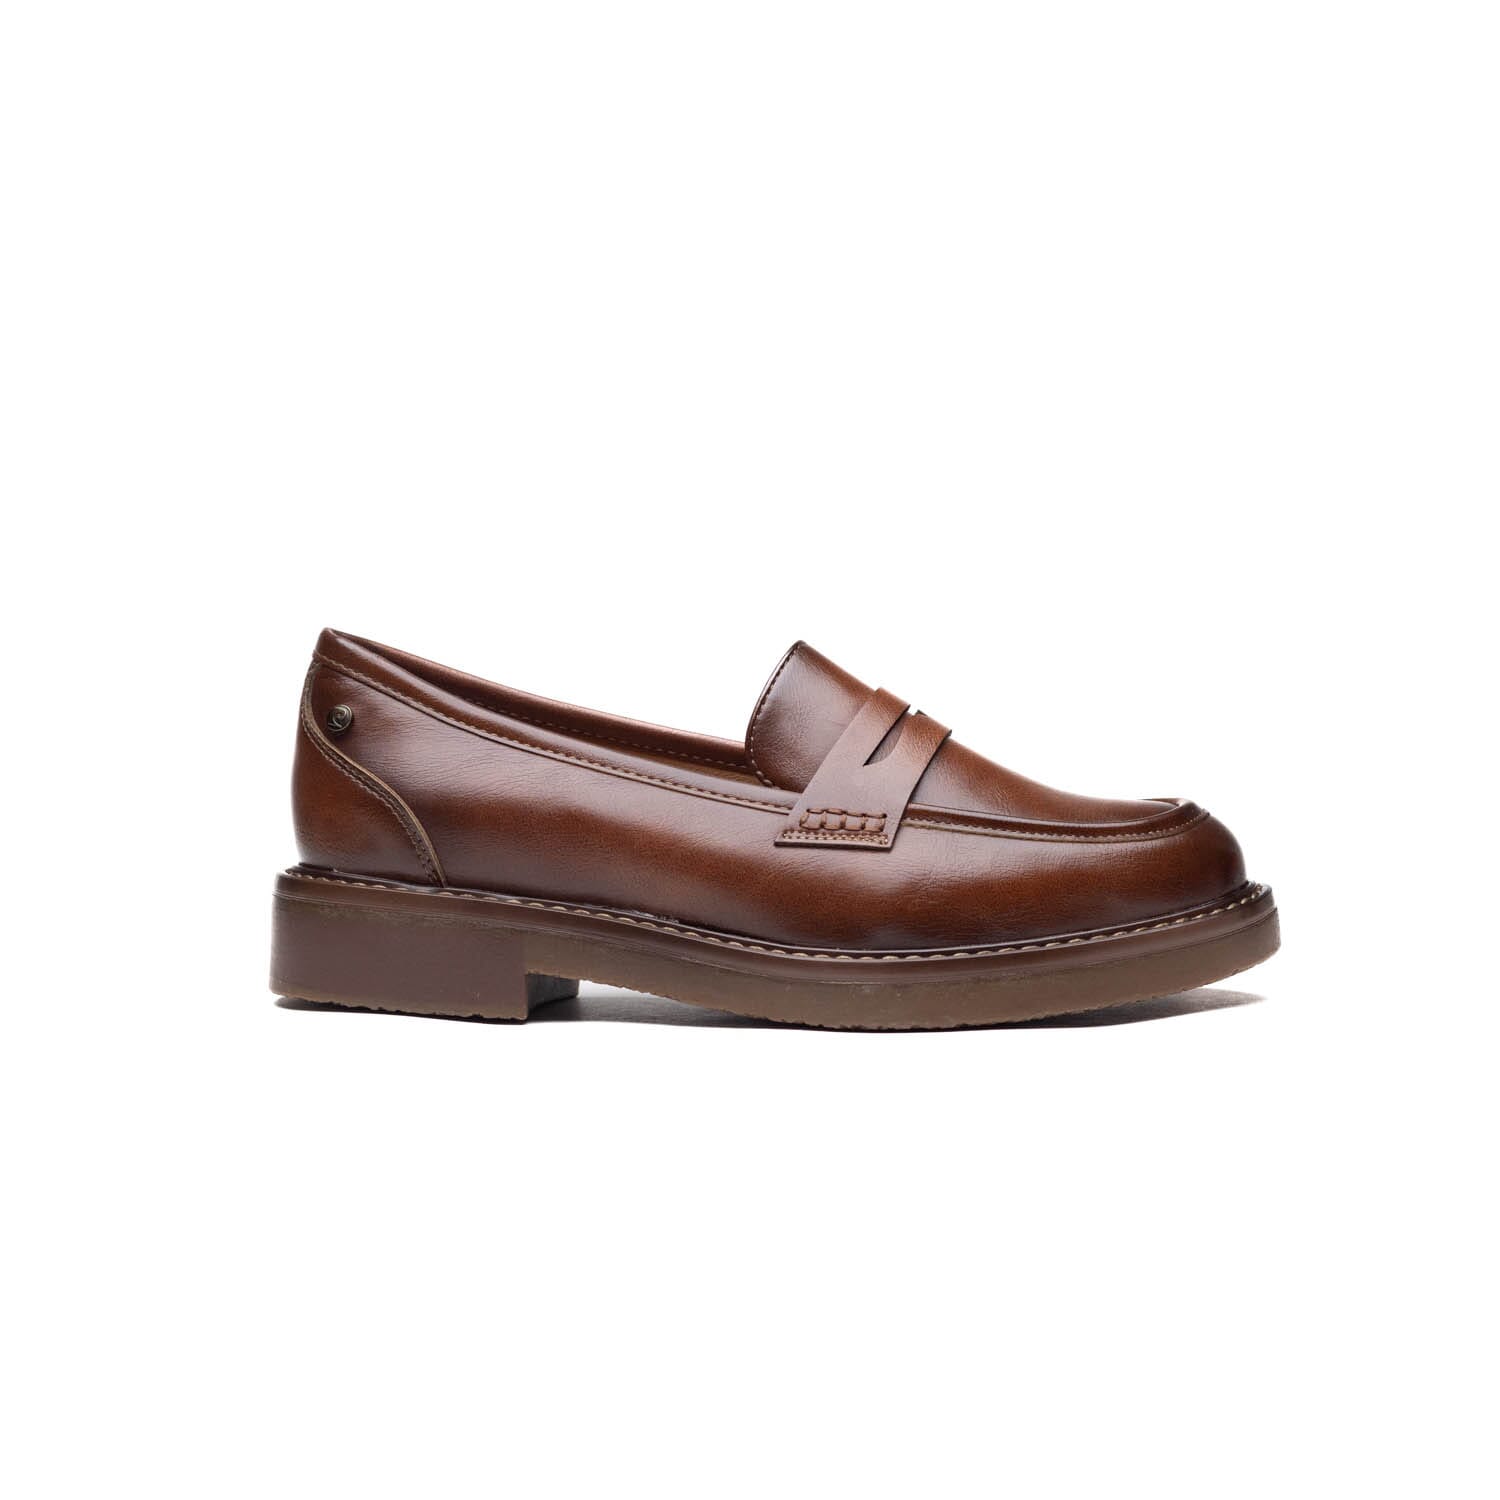 Pierre Cardin -10261 -Brown – Perocili Shoes